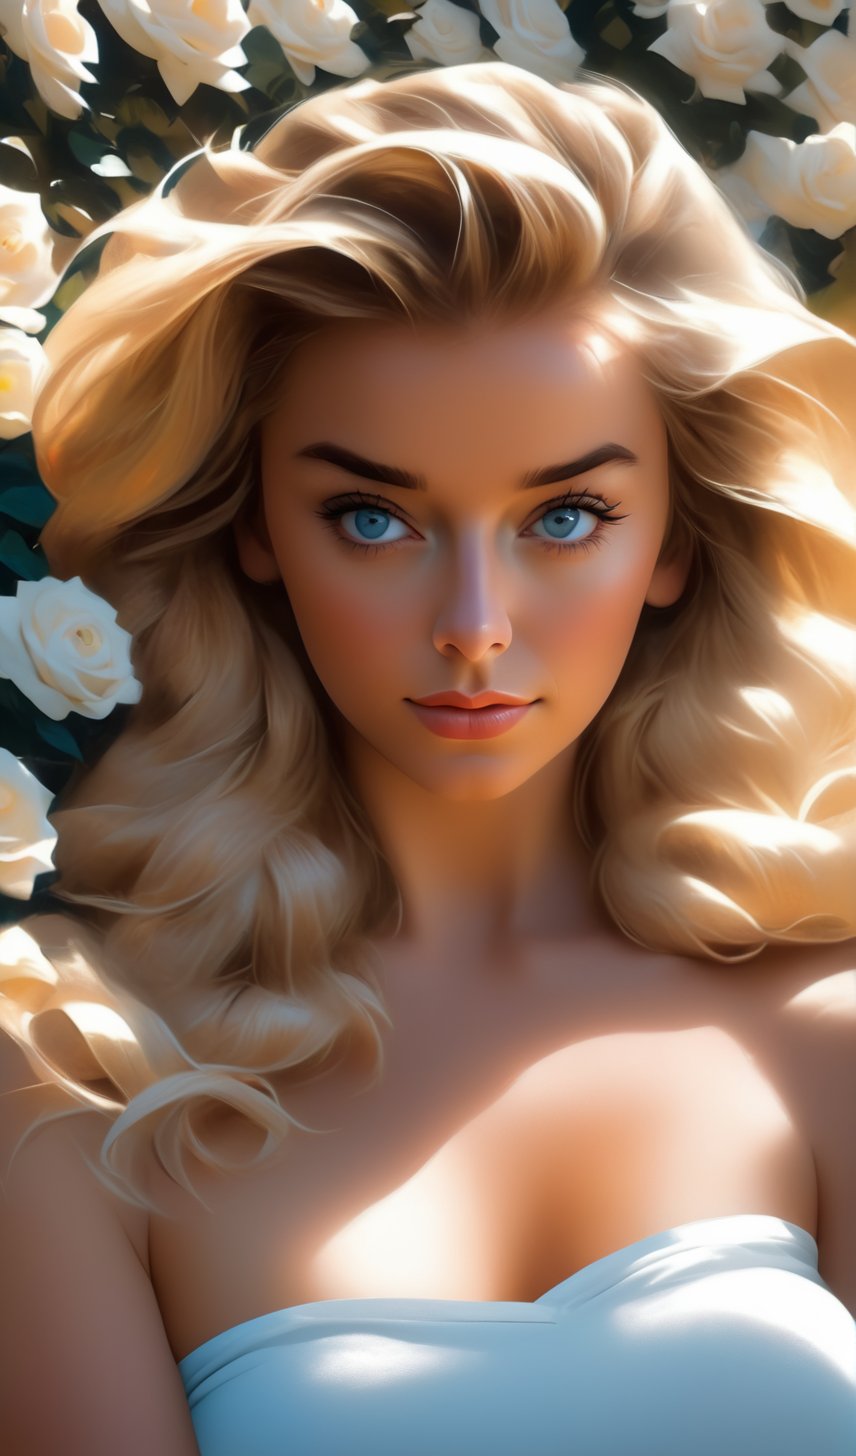 Photorealistic half body portrait of Hyperrealistic character by Alena Aenami, beautiful blond Woman, lying in a garden of white roses, with beautiful blue eyes, detailed and realistic, soft and dreamy hues, cinematic light and shadows
,Anime 